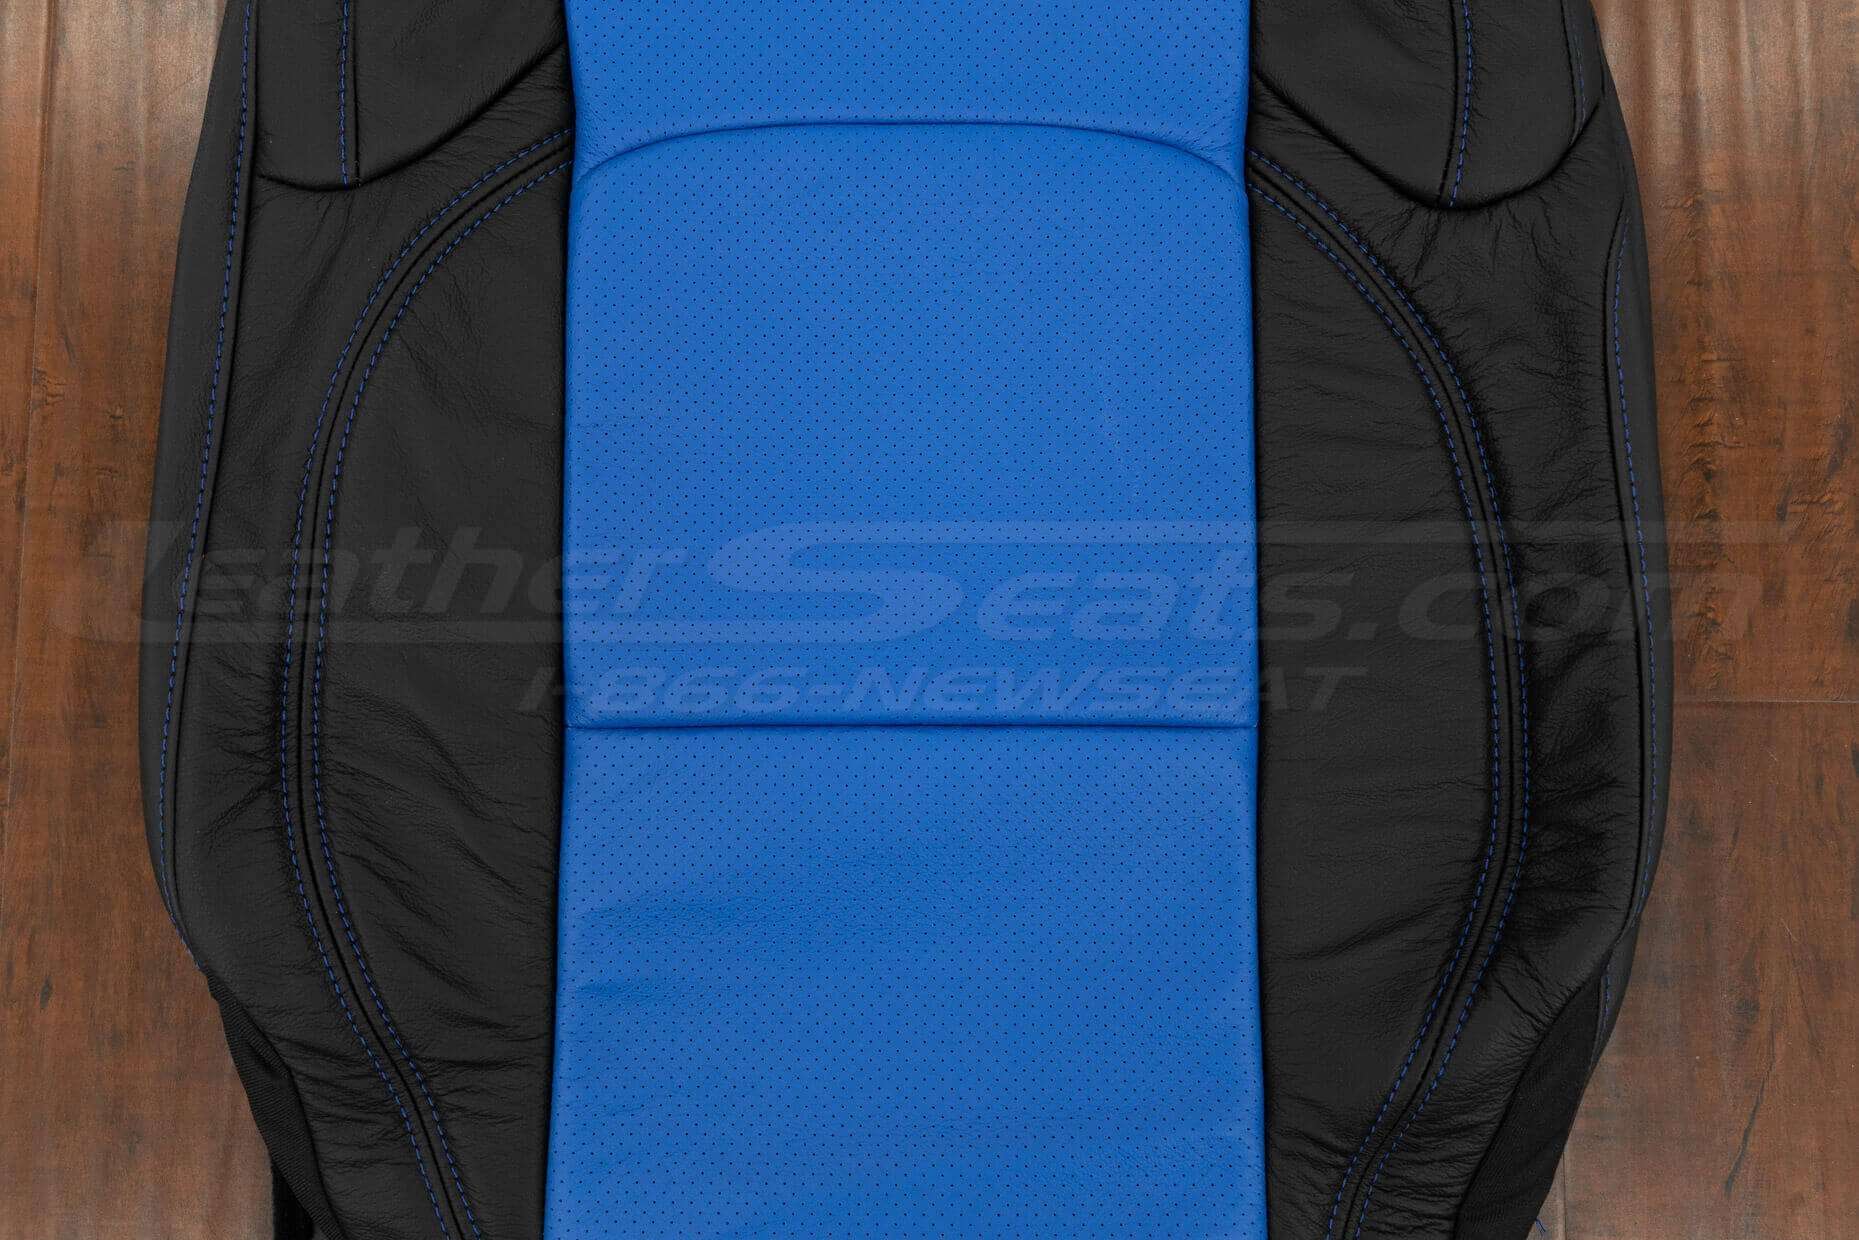 Cobalt Perforated Body section of backrest